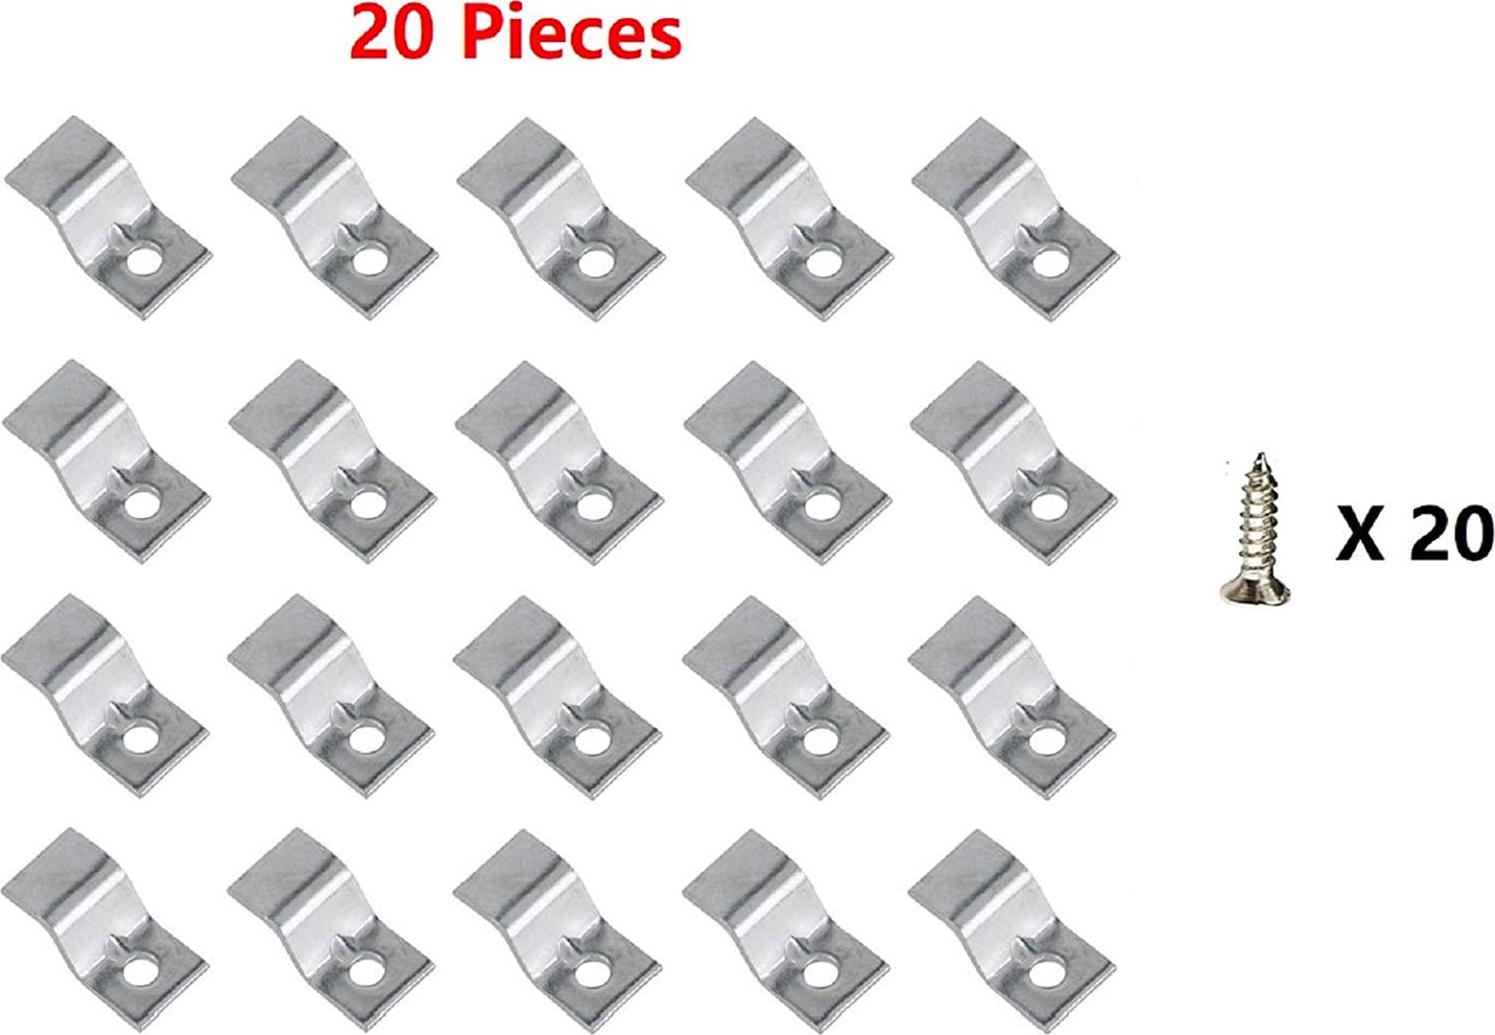 LAJIAOZ, LAJIAOZ Hardware Heavy Duty Table Top Fasteners with Screws,Table Top Connectors/Brackets/Clips,20 Packs(Include 20 Clips and 20 Screws)